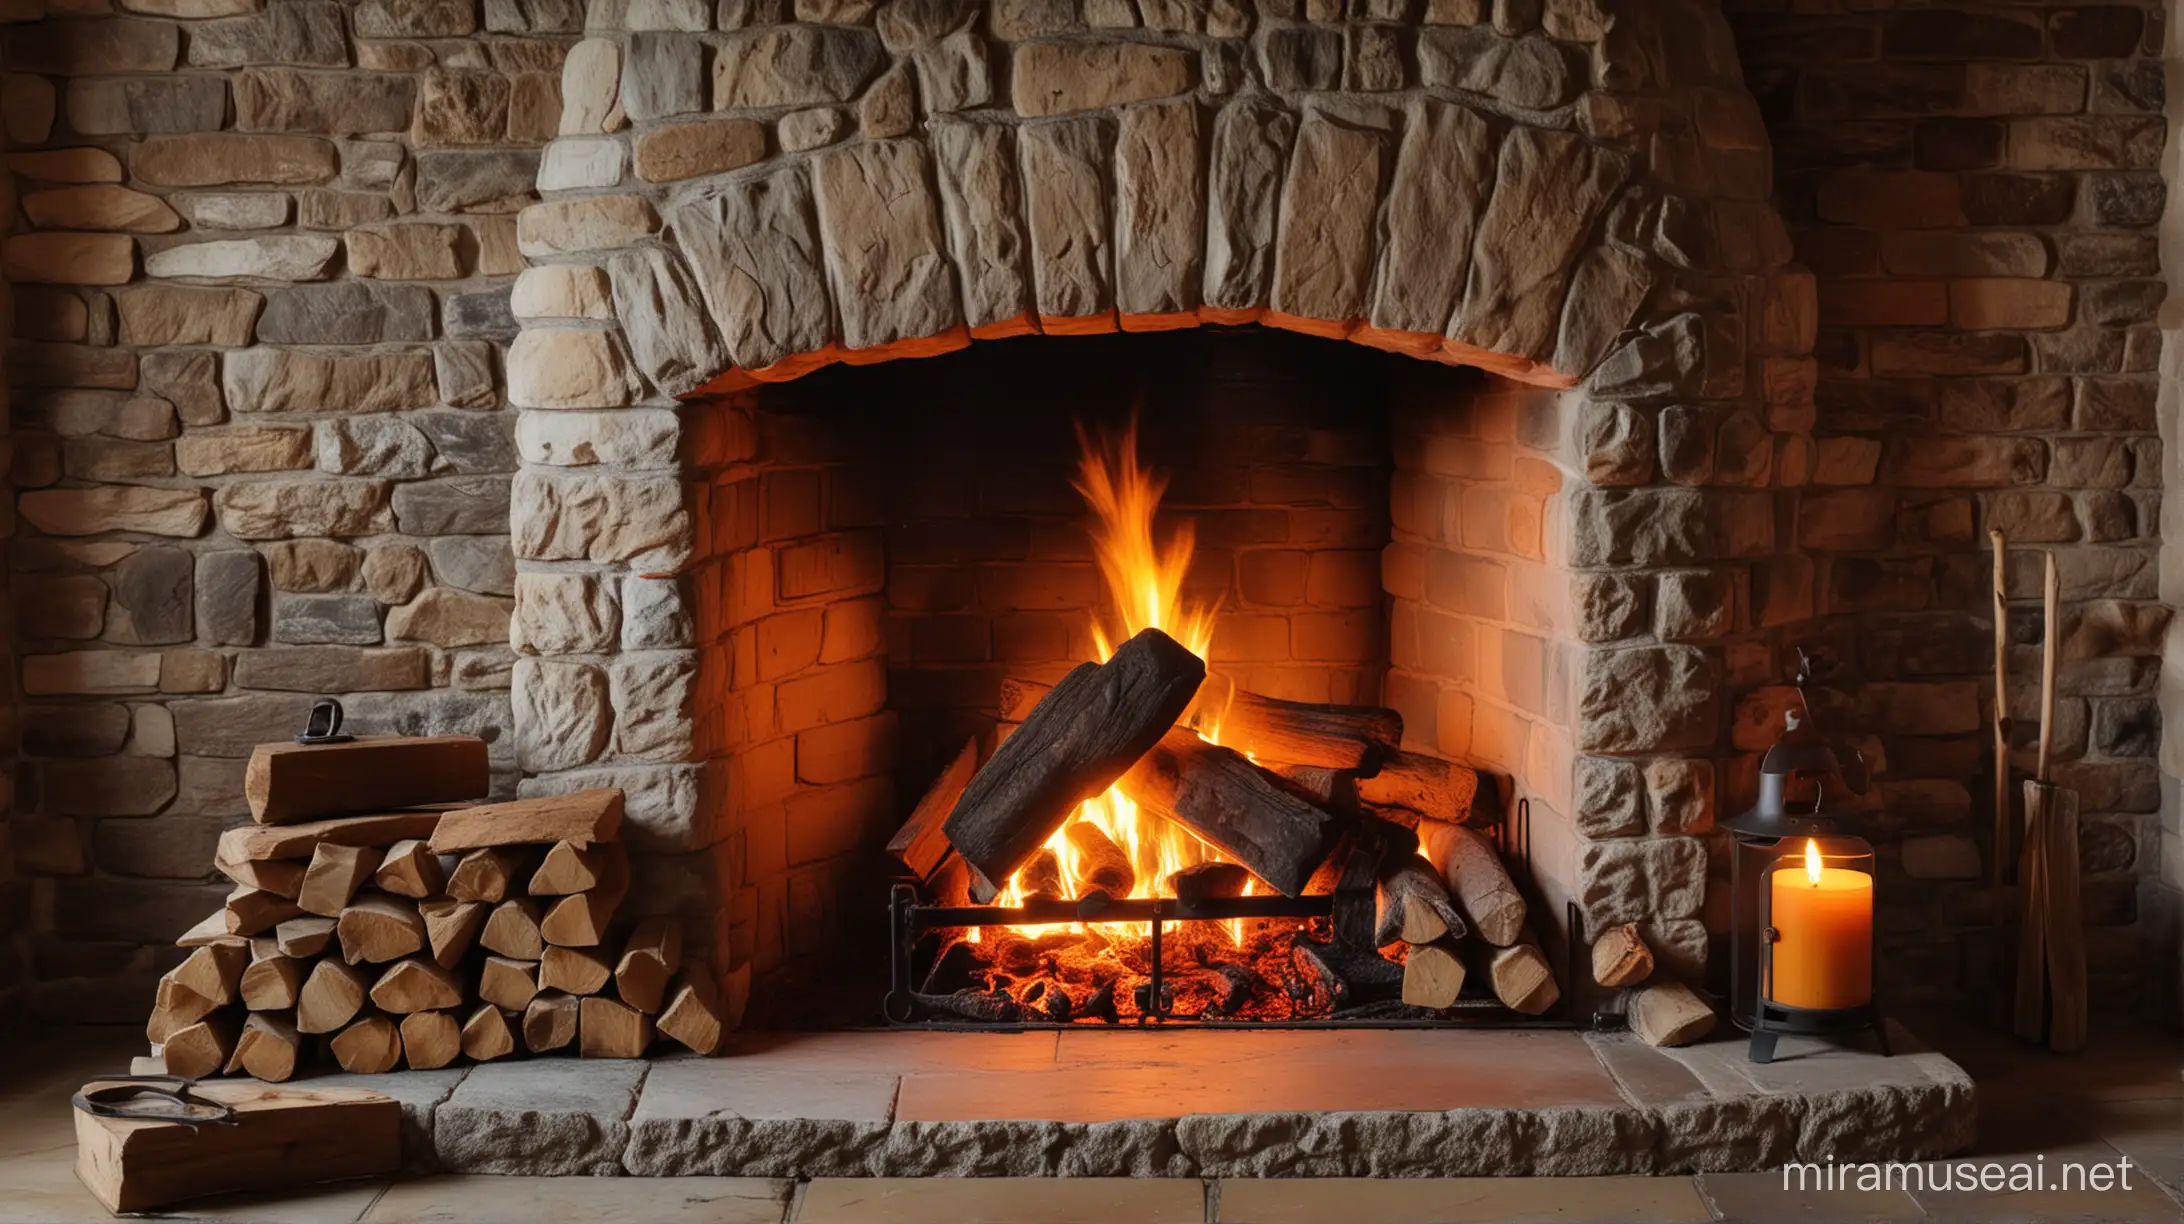 An old well-maintained English fireplace made of stone in close-up. The fireplace has a classic shape with an open firebox. The fireplace has masonry, a grate and a woodcutter. There is wood in the fireplace and a fire is burning. The fire has a bright orange color and the flames rise up. The room is dim.